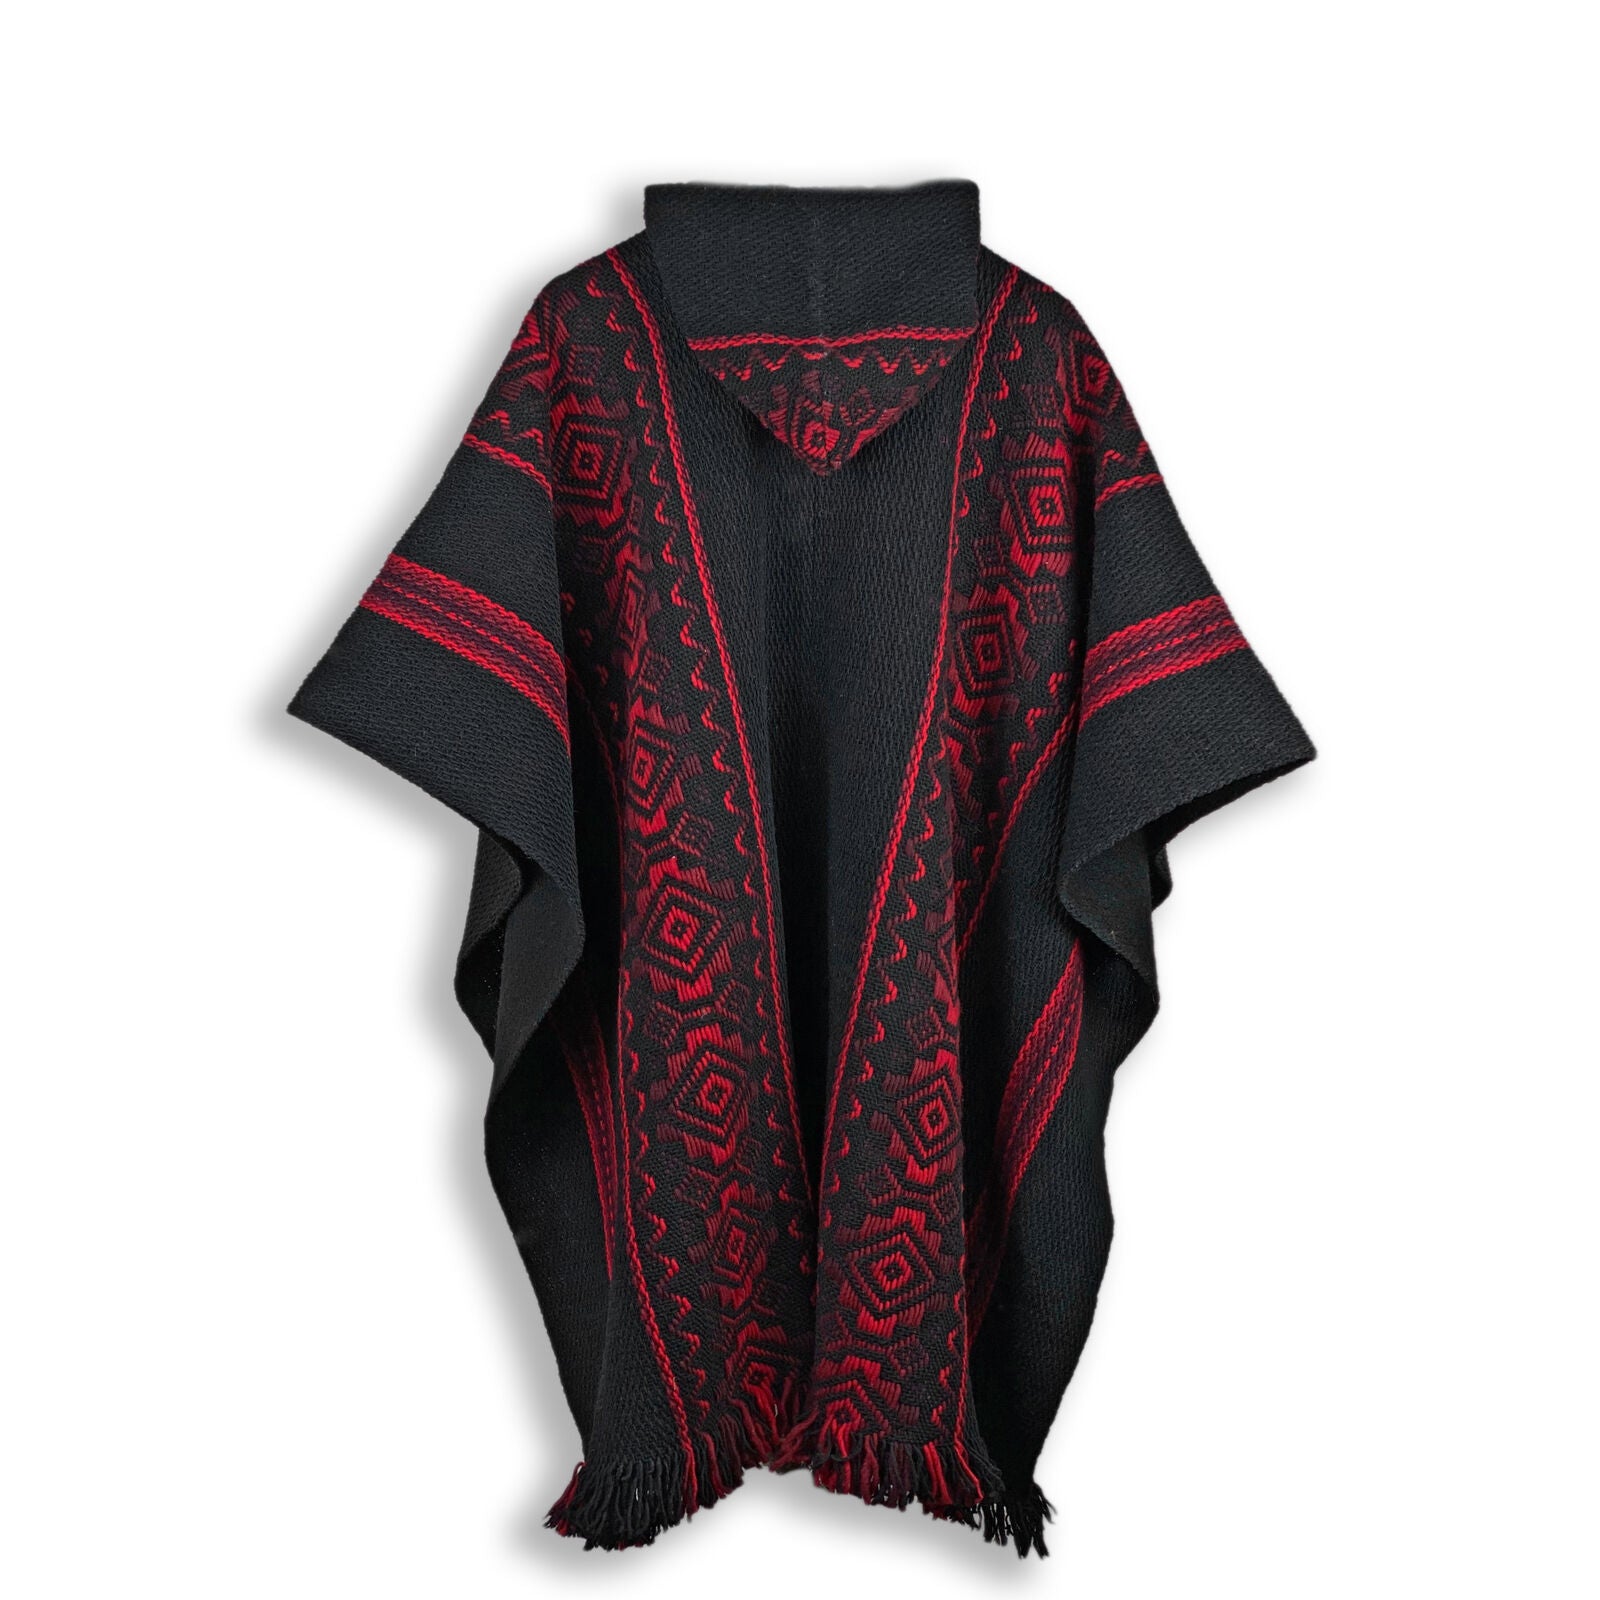 Unisex South American Handwoven Hooded Poncho - solid black with red diamonds pattern